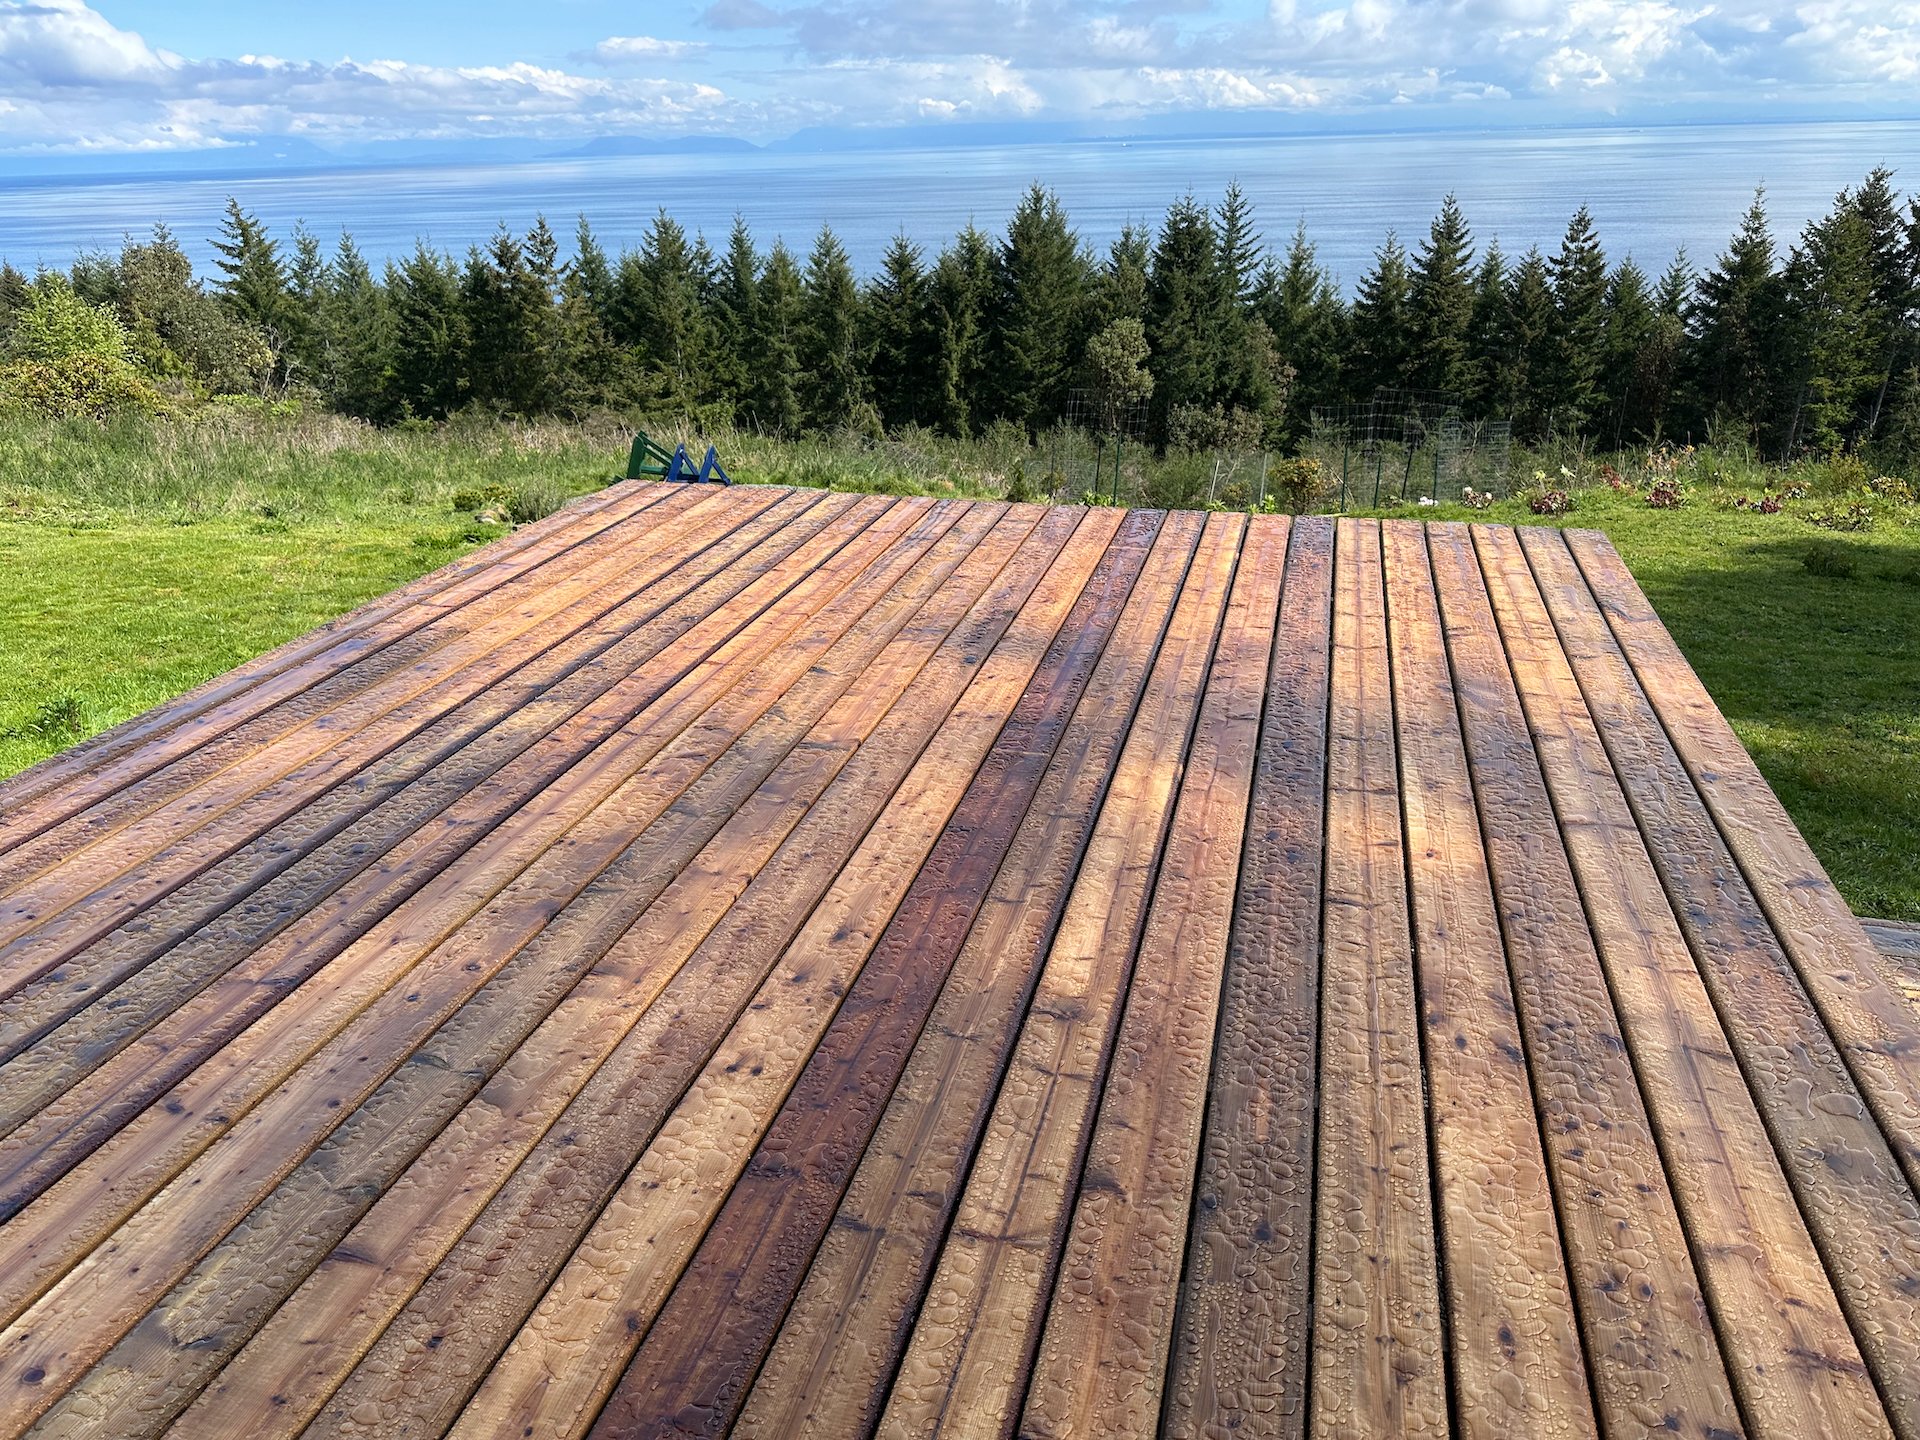  The new deck, all freshly sealed up.  